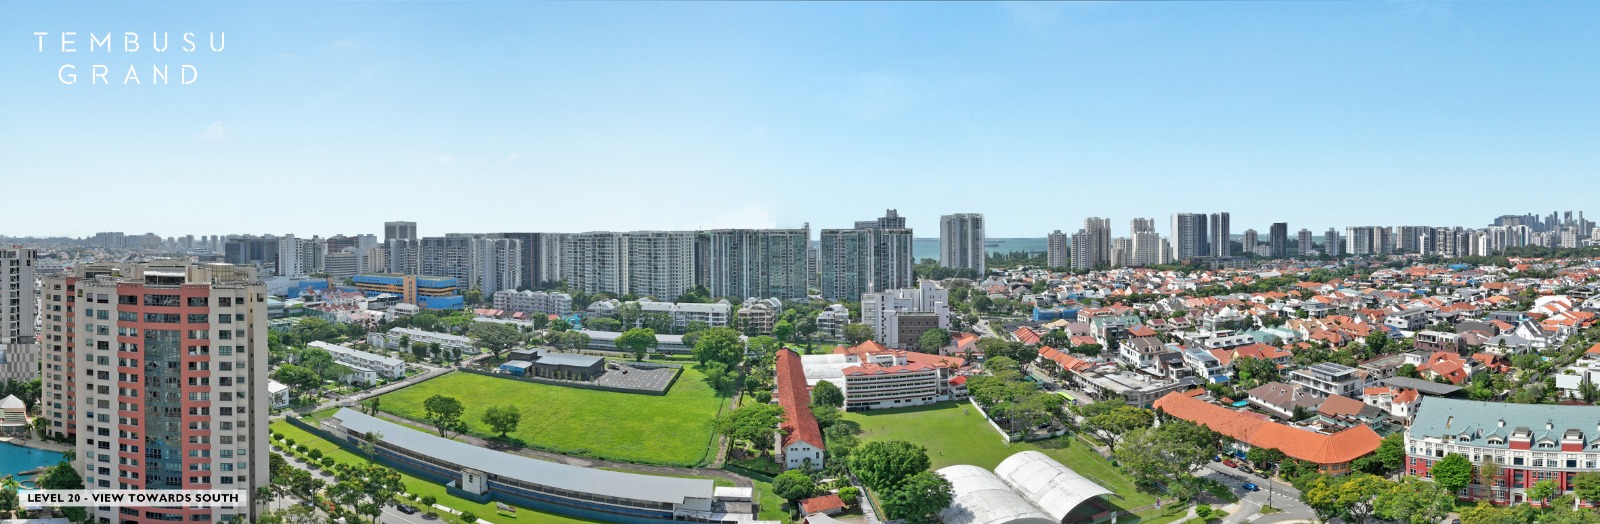 Tembusu Residences Drone View South from Level 20